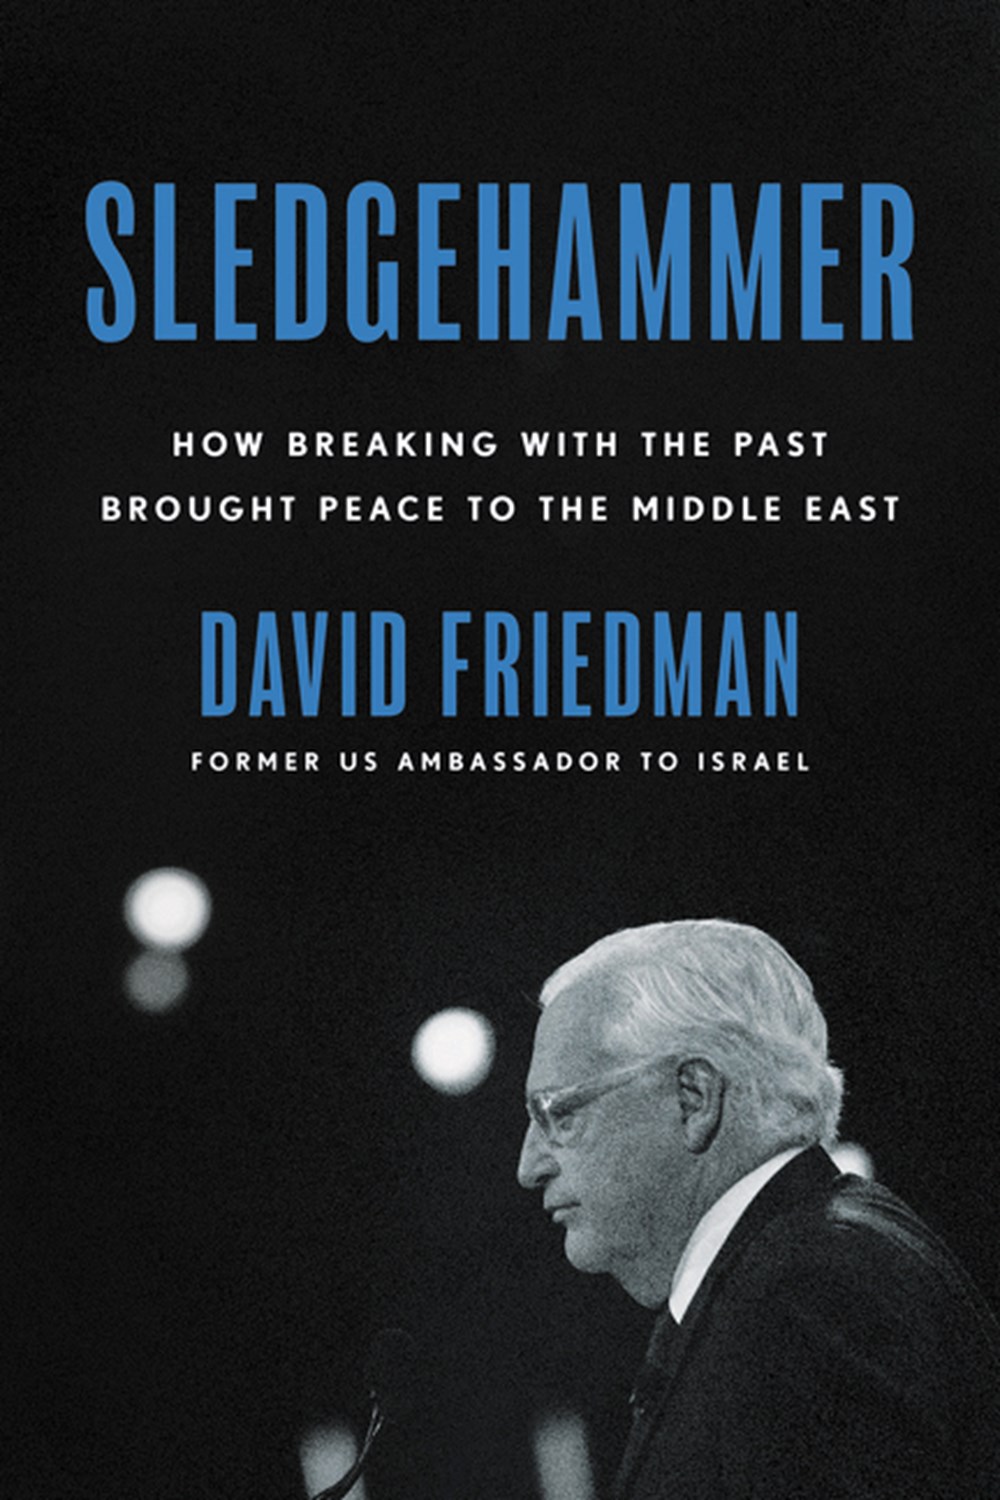 Sledgehammer How Breaking with the Past Brought Peace to the Middle East